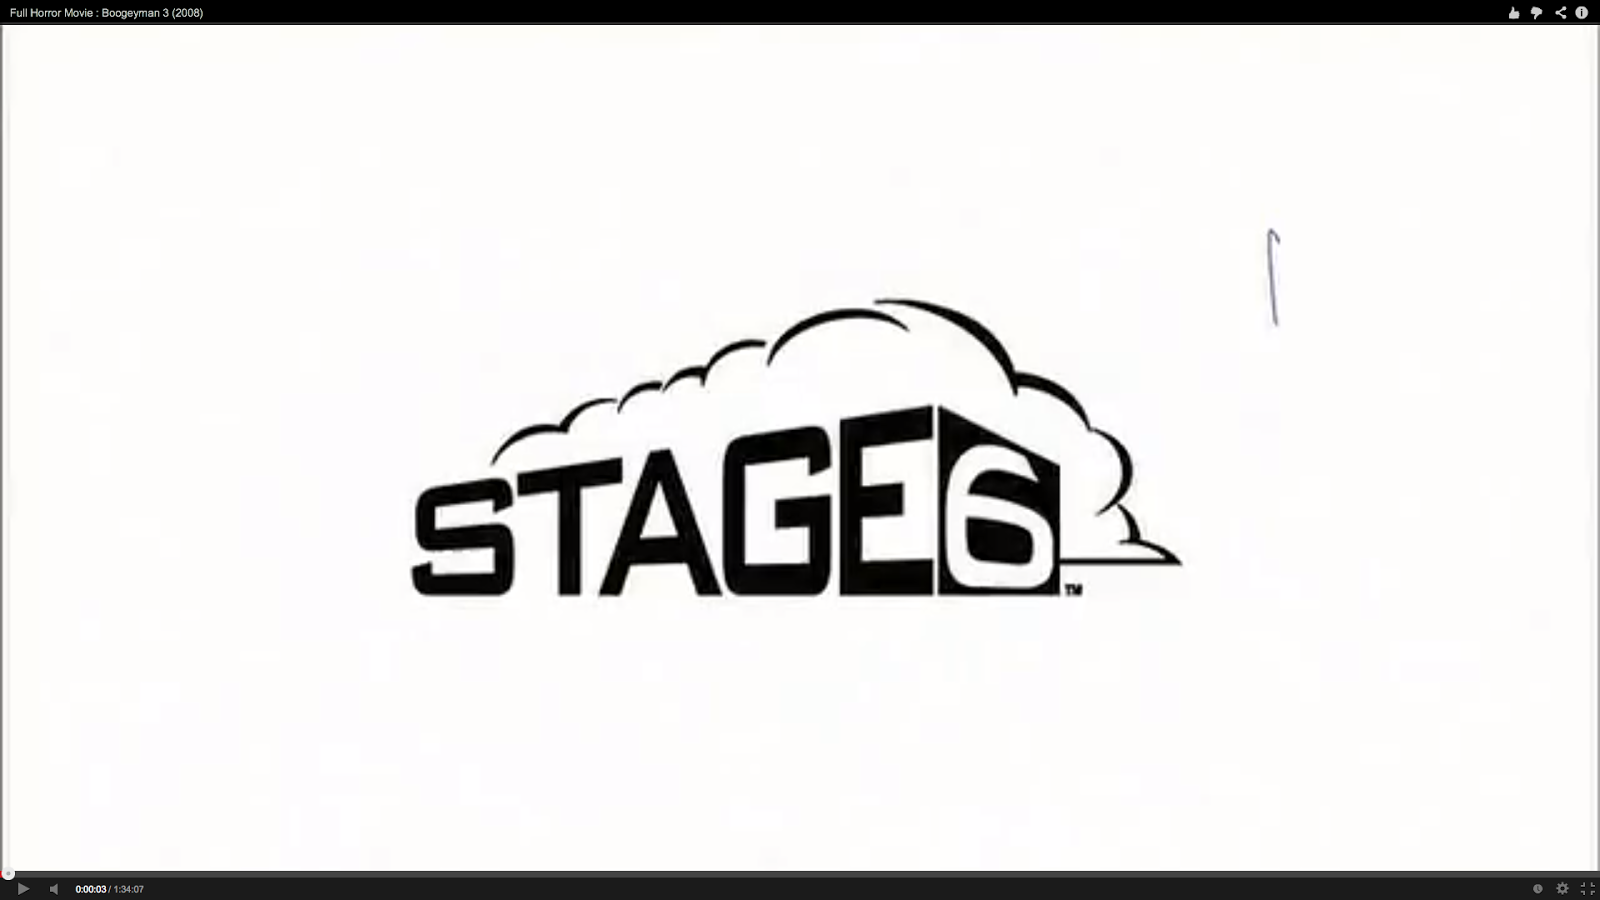 Стейдж 6. Stage 6 films. Stage 6 films logo. Stage Sony pictures. Логотип three brothers Production.